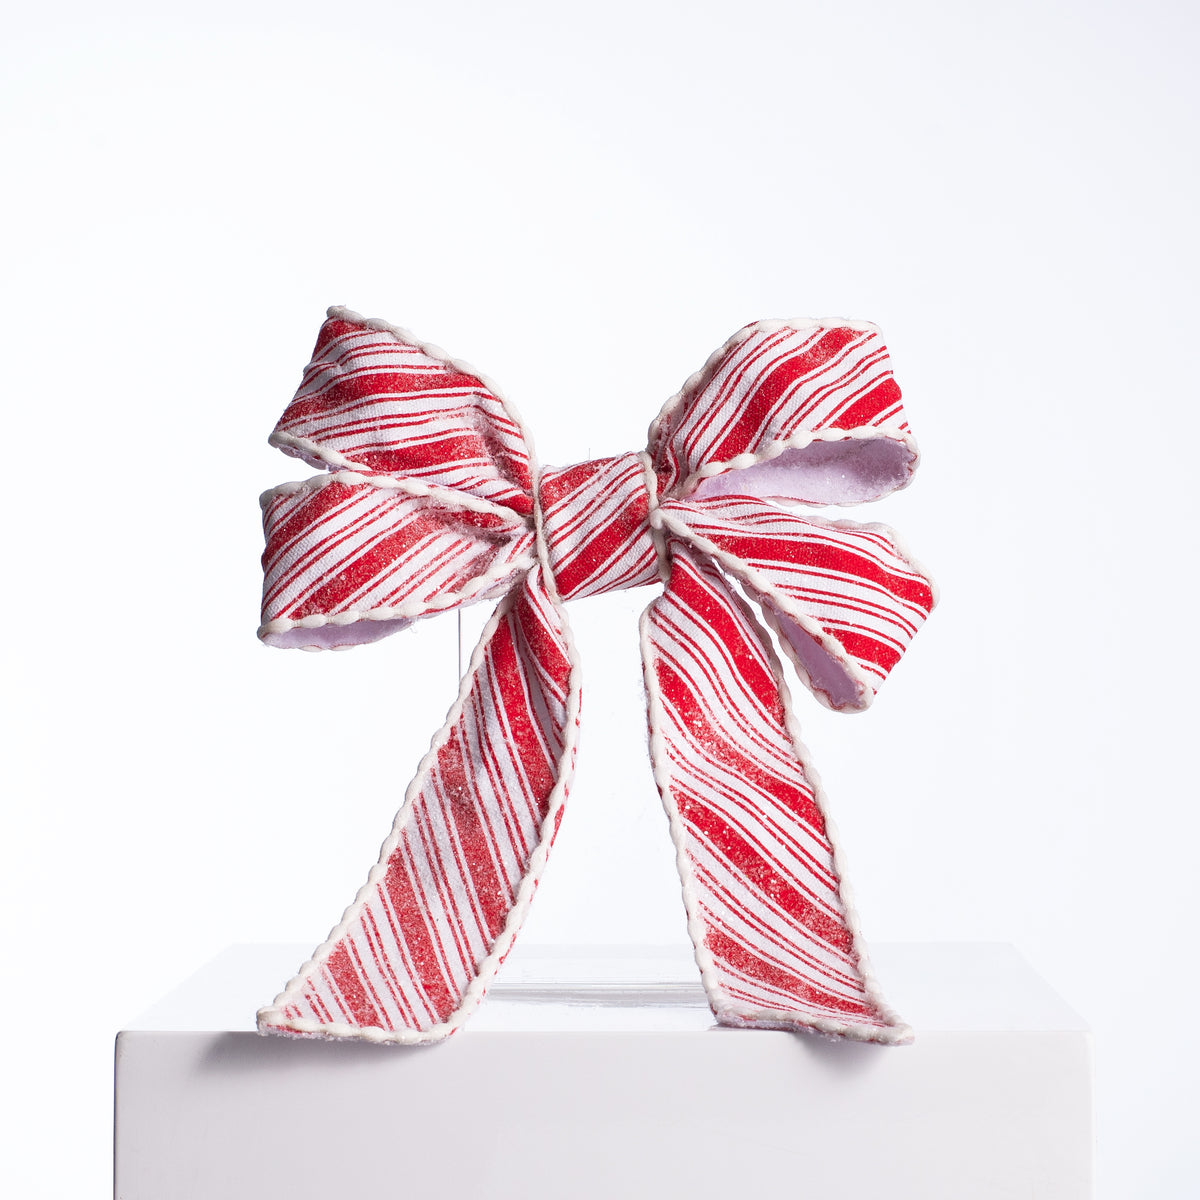 Wired Christmas Ribbon Red Stripes - 1 1/2 x 10 Yards, Red White  Peppermint Candy Cane, Garland, Gifts 